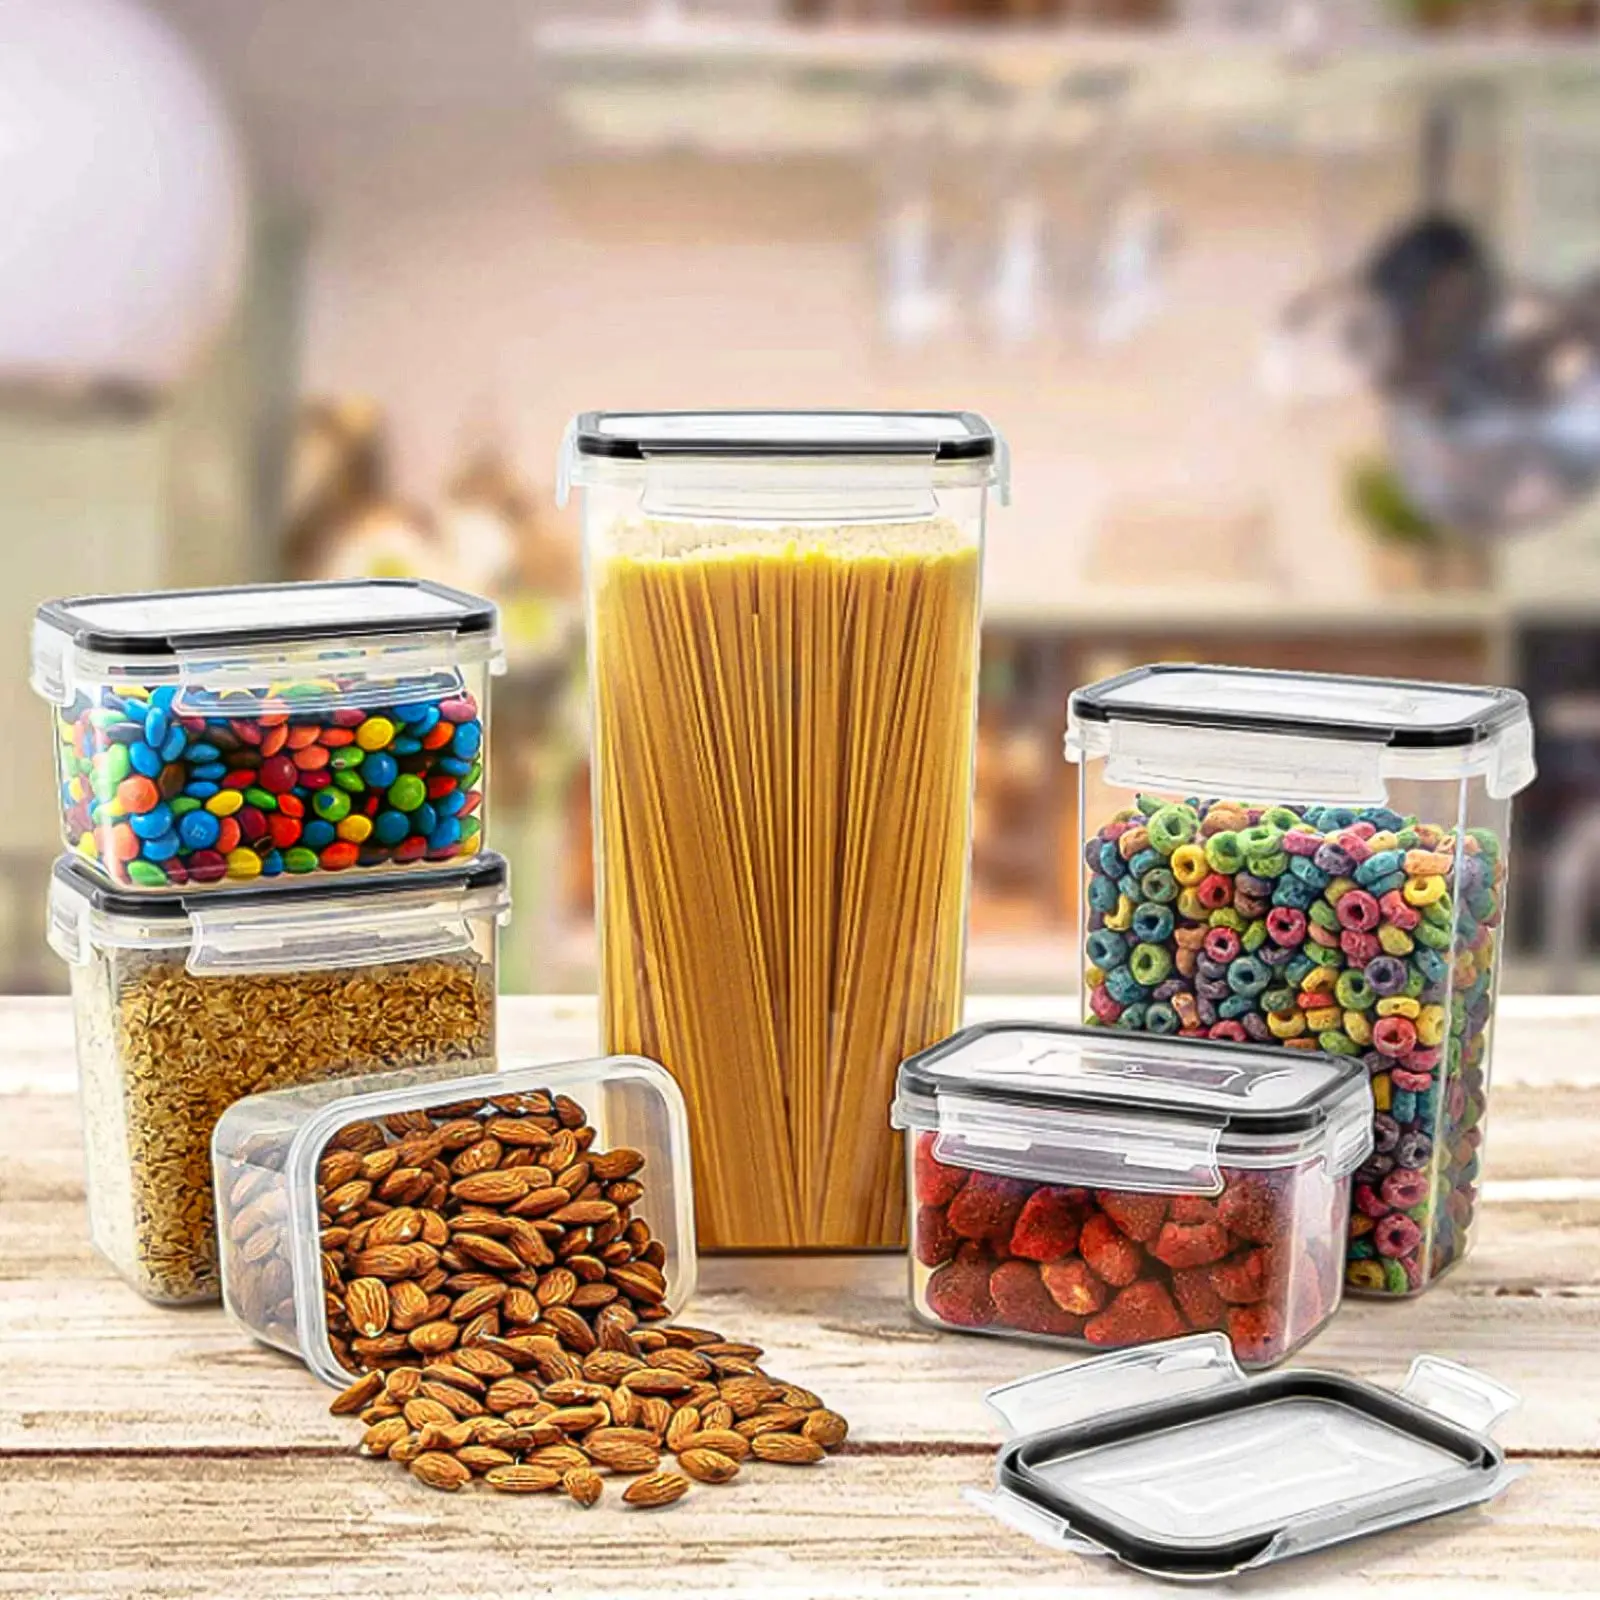 https://ae01.alicdn.com/kf/S724a75ac58974c229e2669d4907595ddt/7Pcs-Sealed-Kitchen-Food-Storage-Containers-Box-Canister-Set-with-Lid-Refrigerator-Transparent-Cans-Kitchen-Storage.jpg